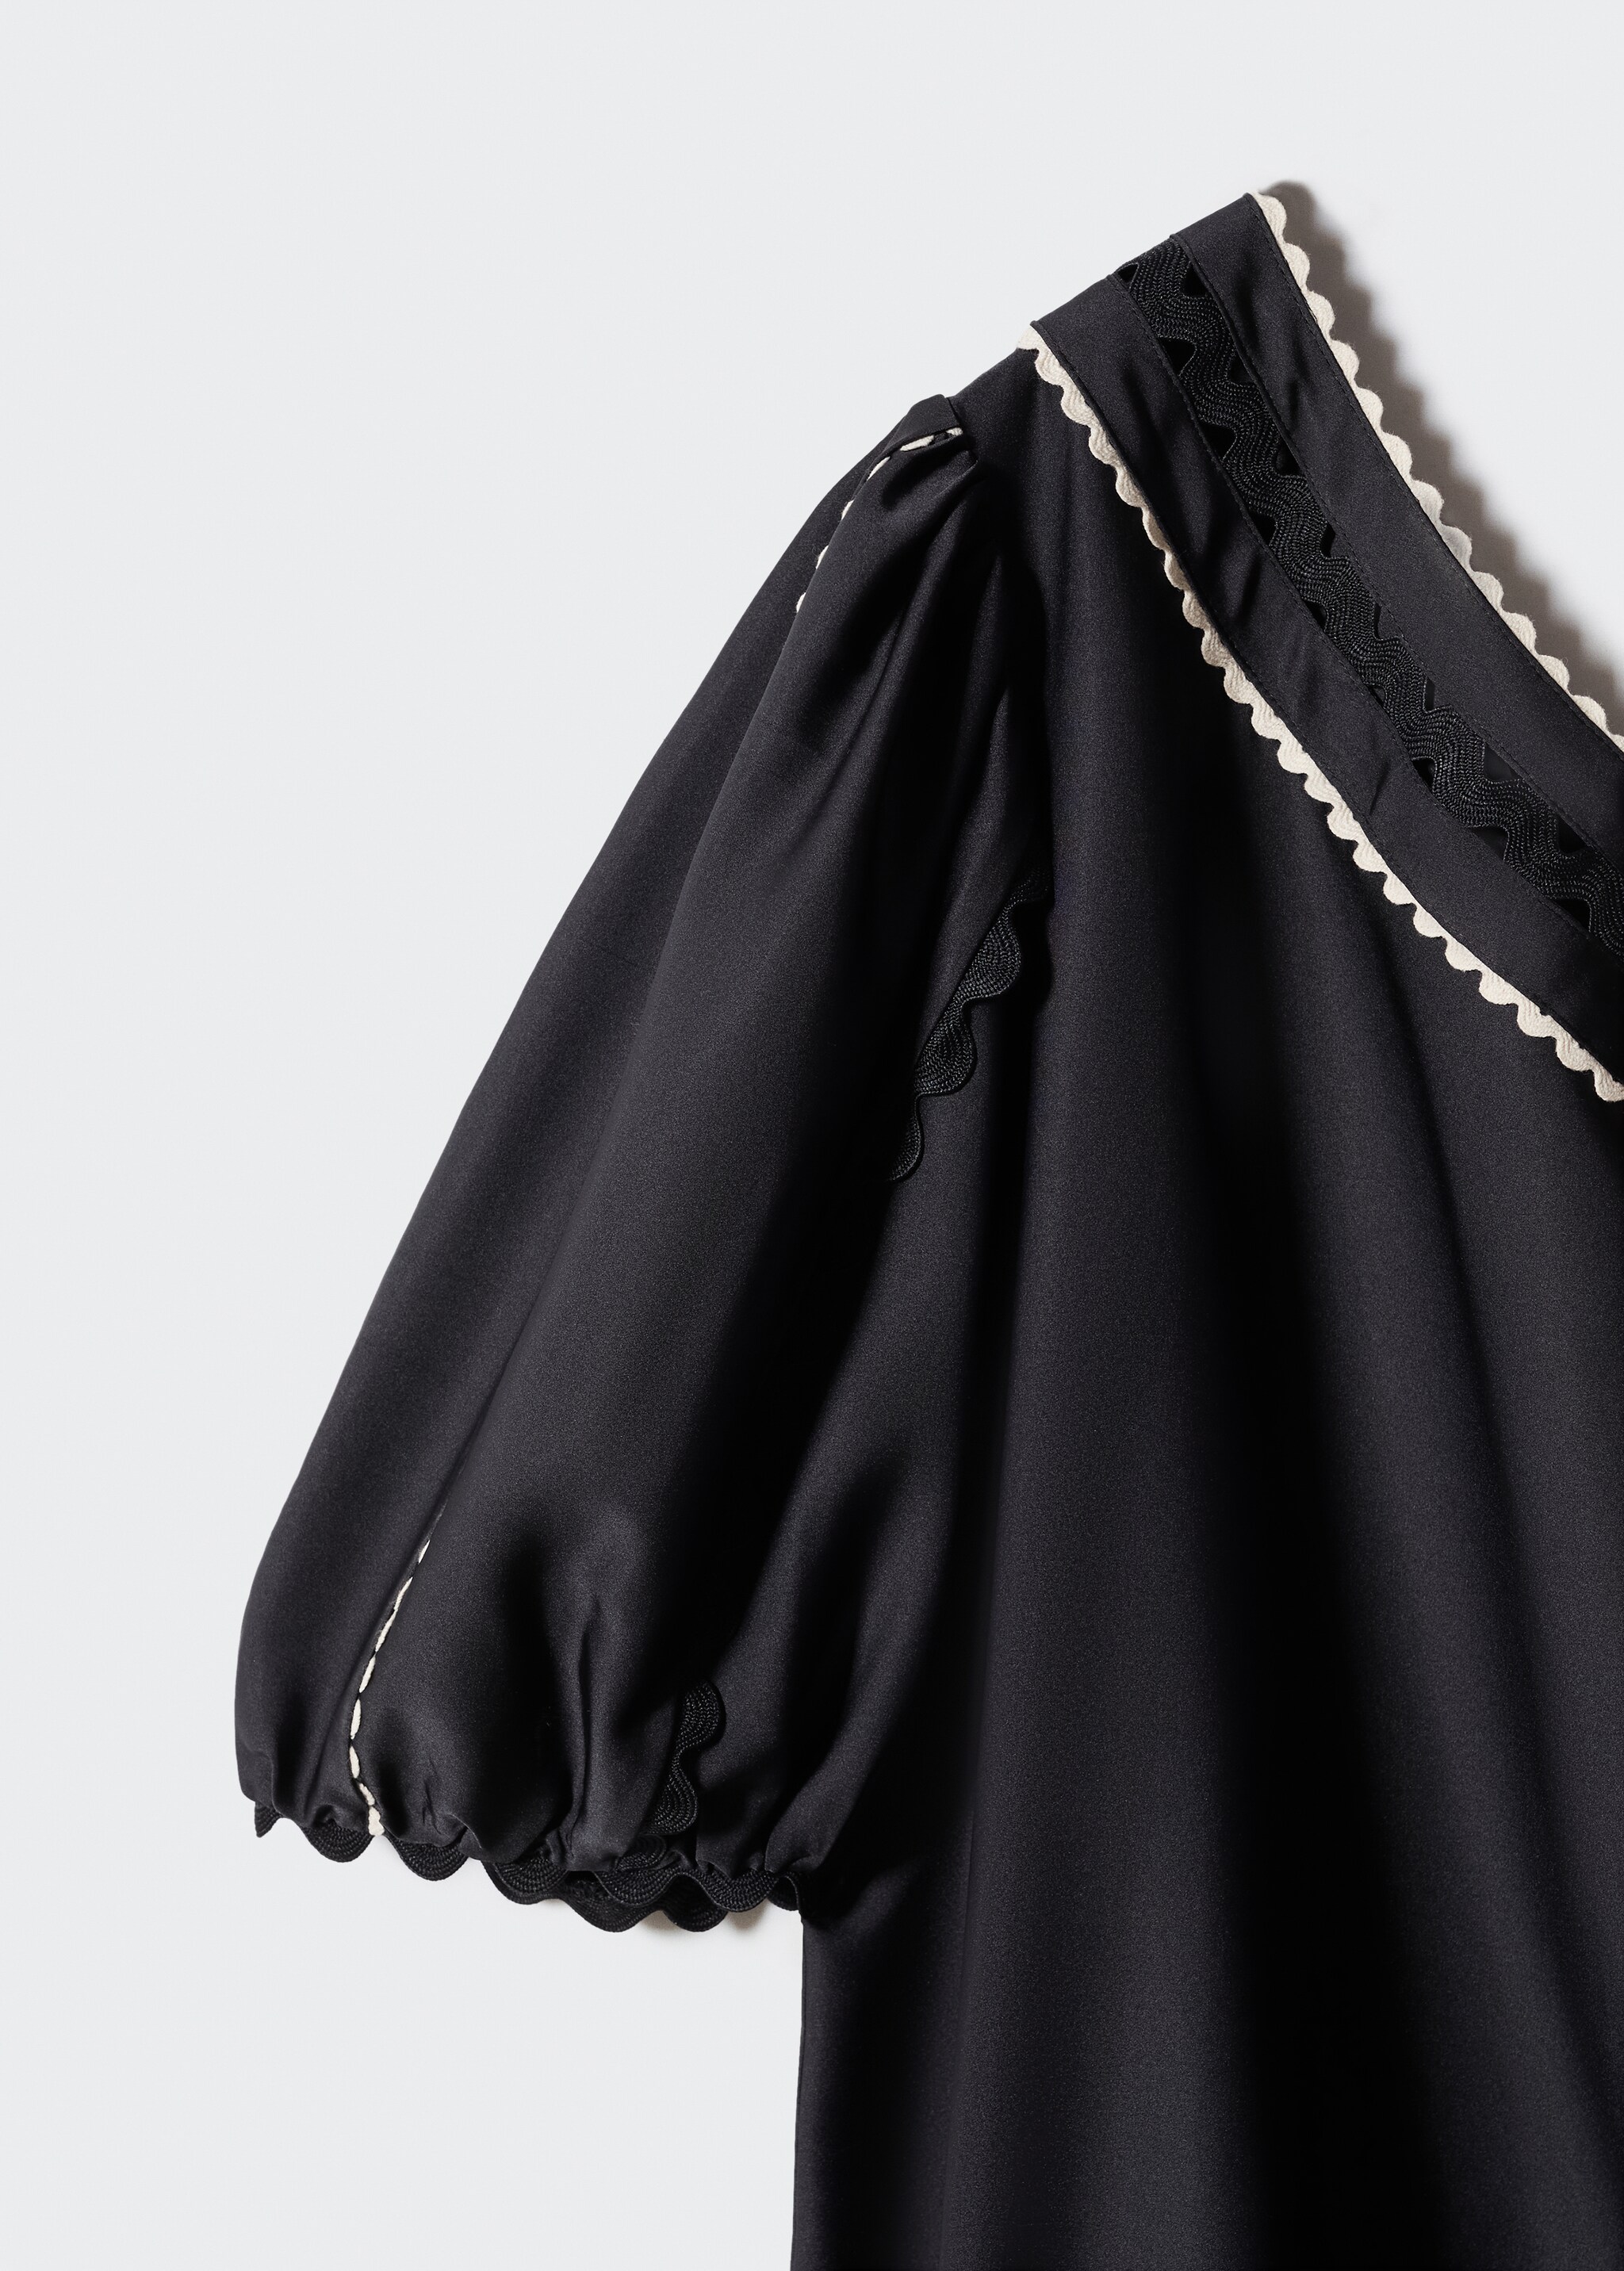 Asymmetrical satin dress - Details of the article 8